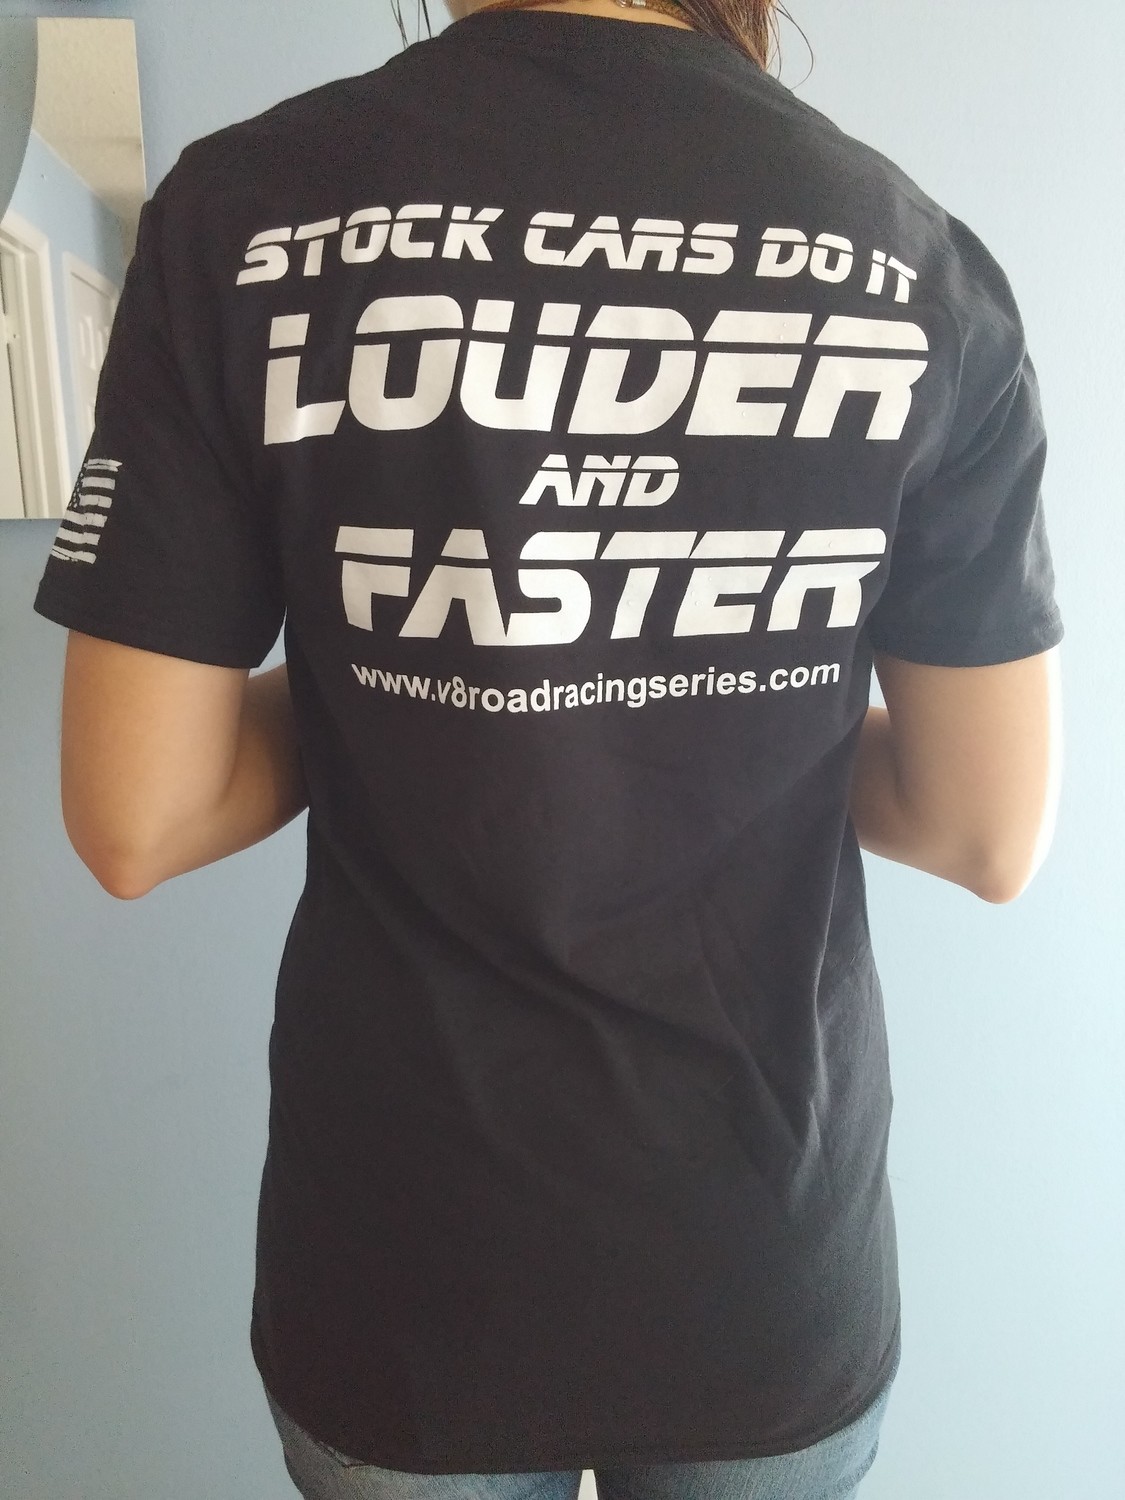 Official V8RRS Tshirt W/ " STOCK CARS DO IT LOUDER AND FASTER"